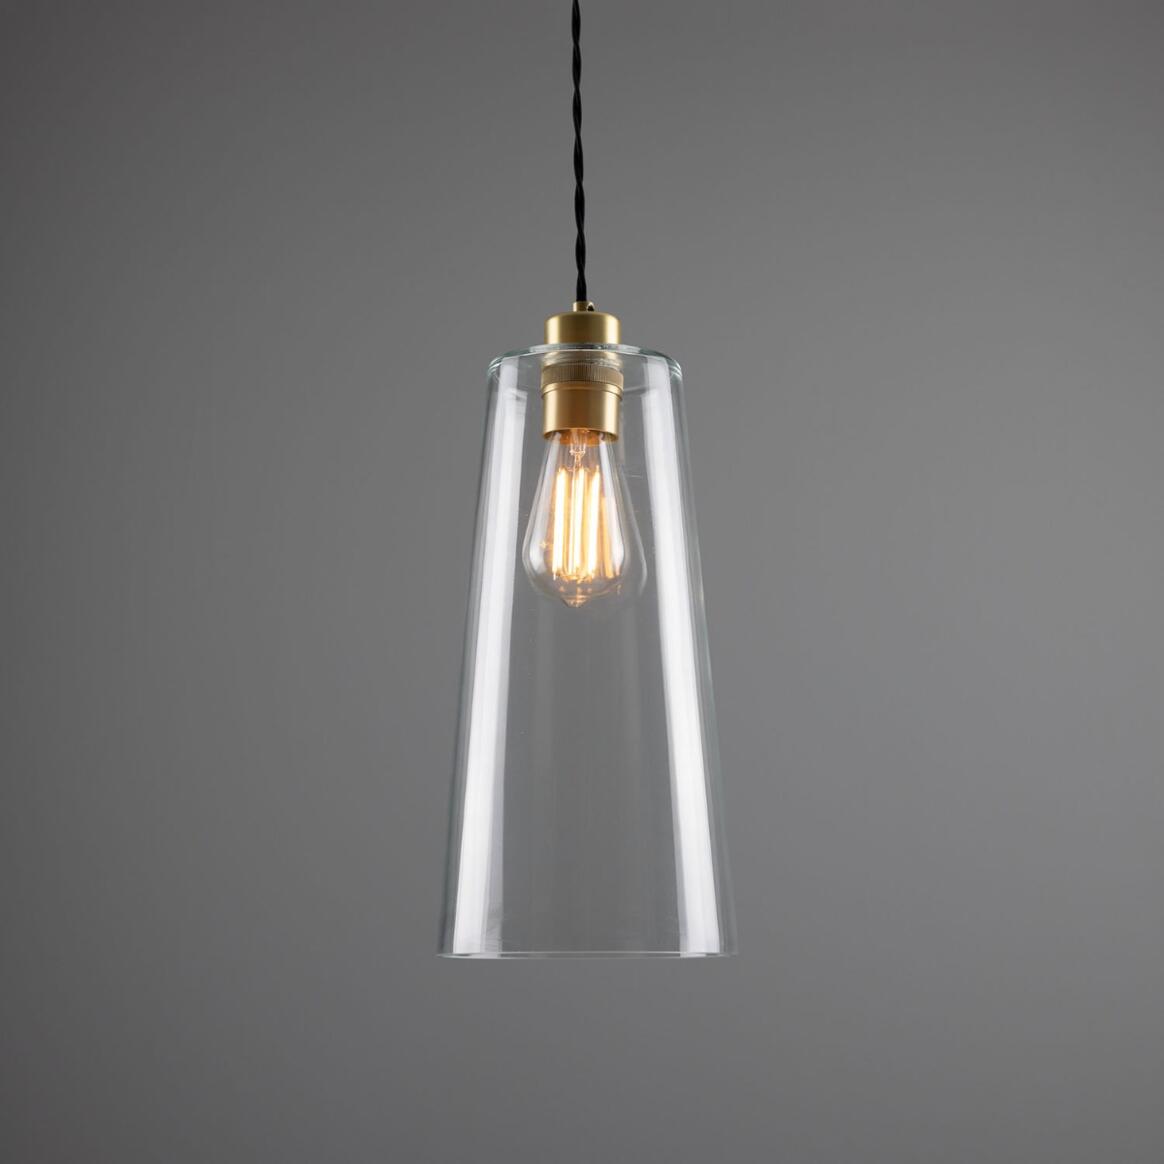 Malang Tall Slender Clear Glass Pendant Light 5.5" main product image